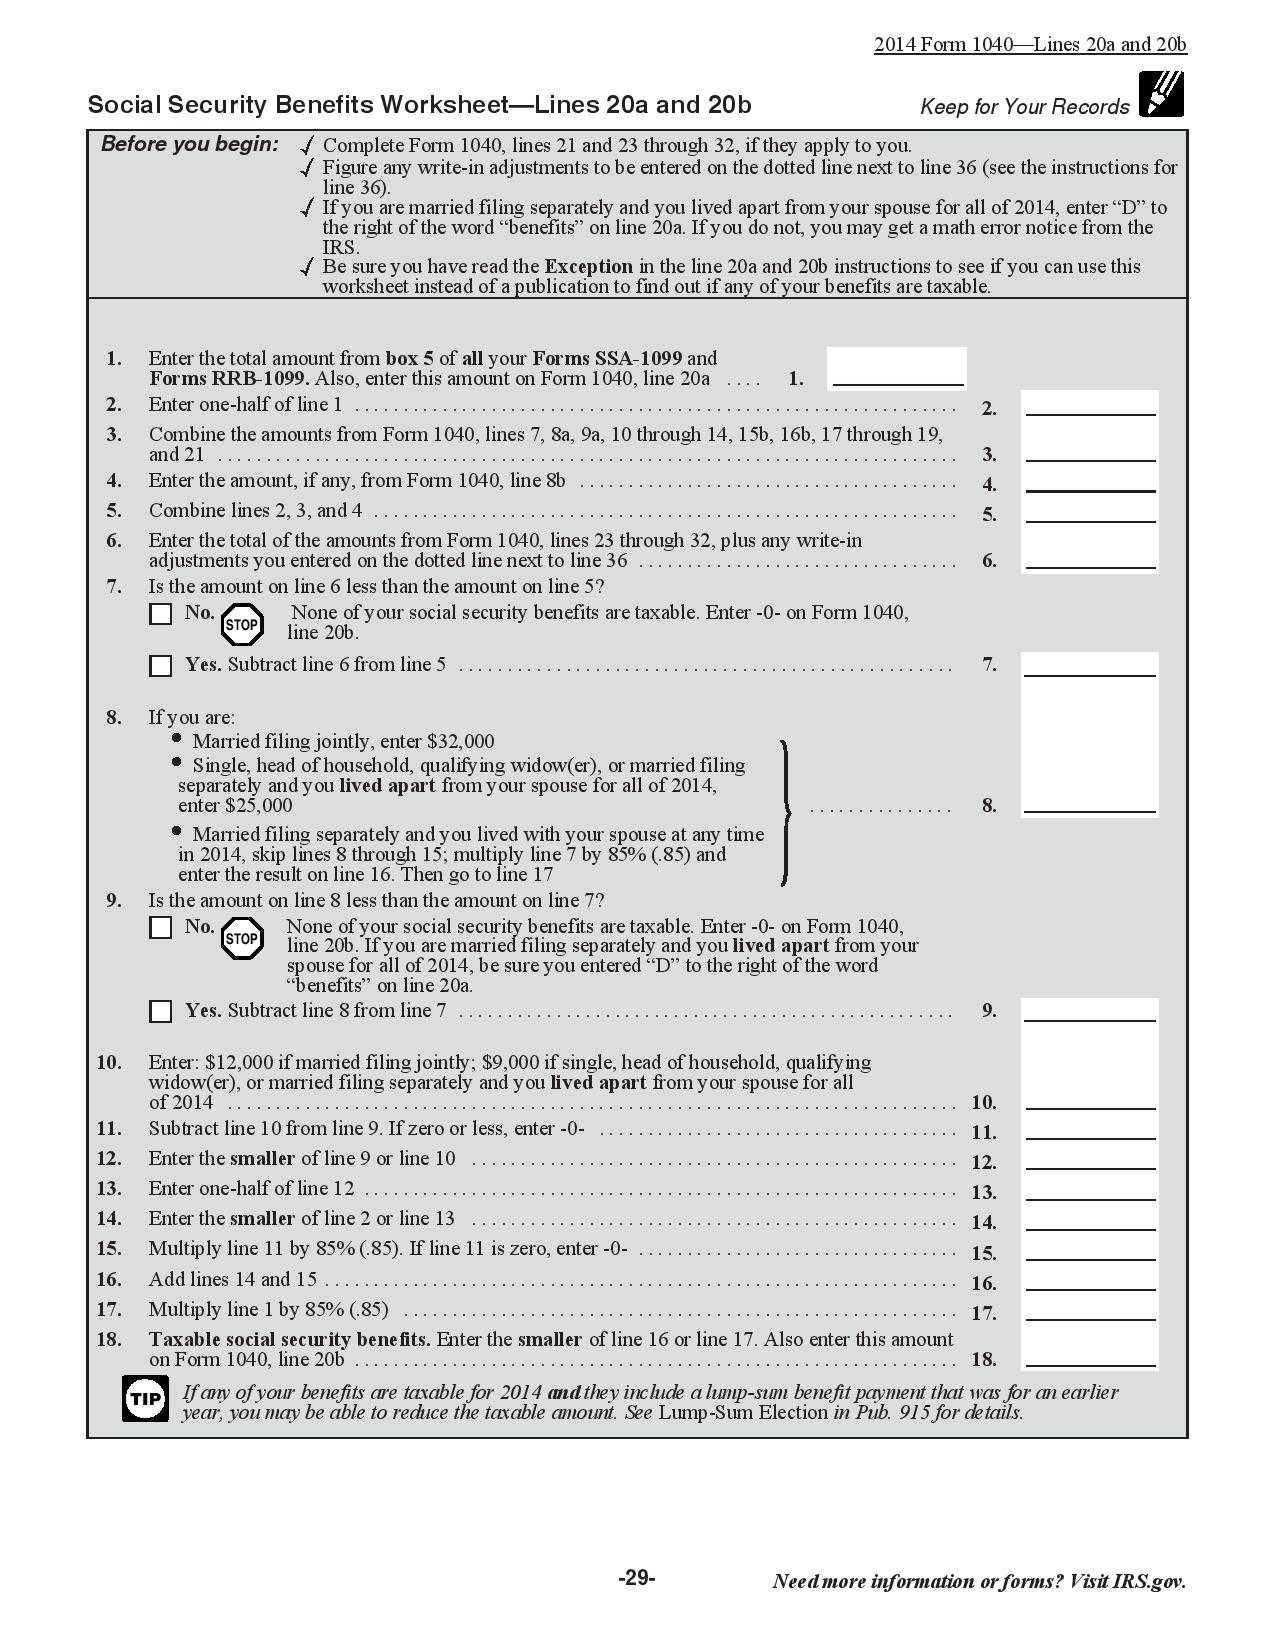 Taxation Worksheet Answers Along with social Security Taxable Worksheet